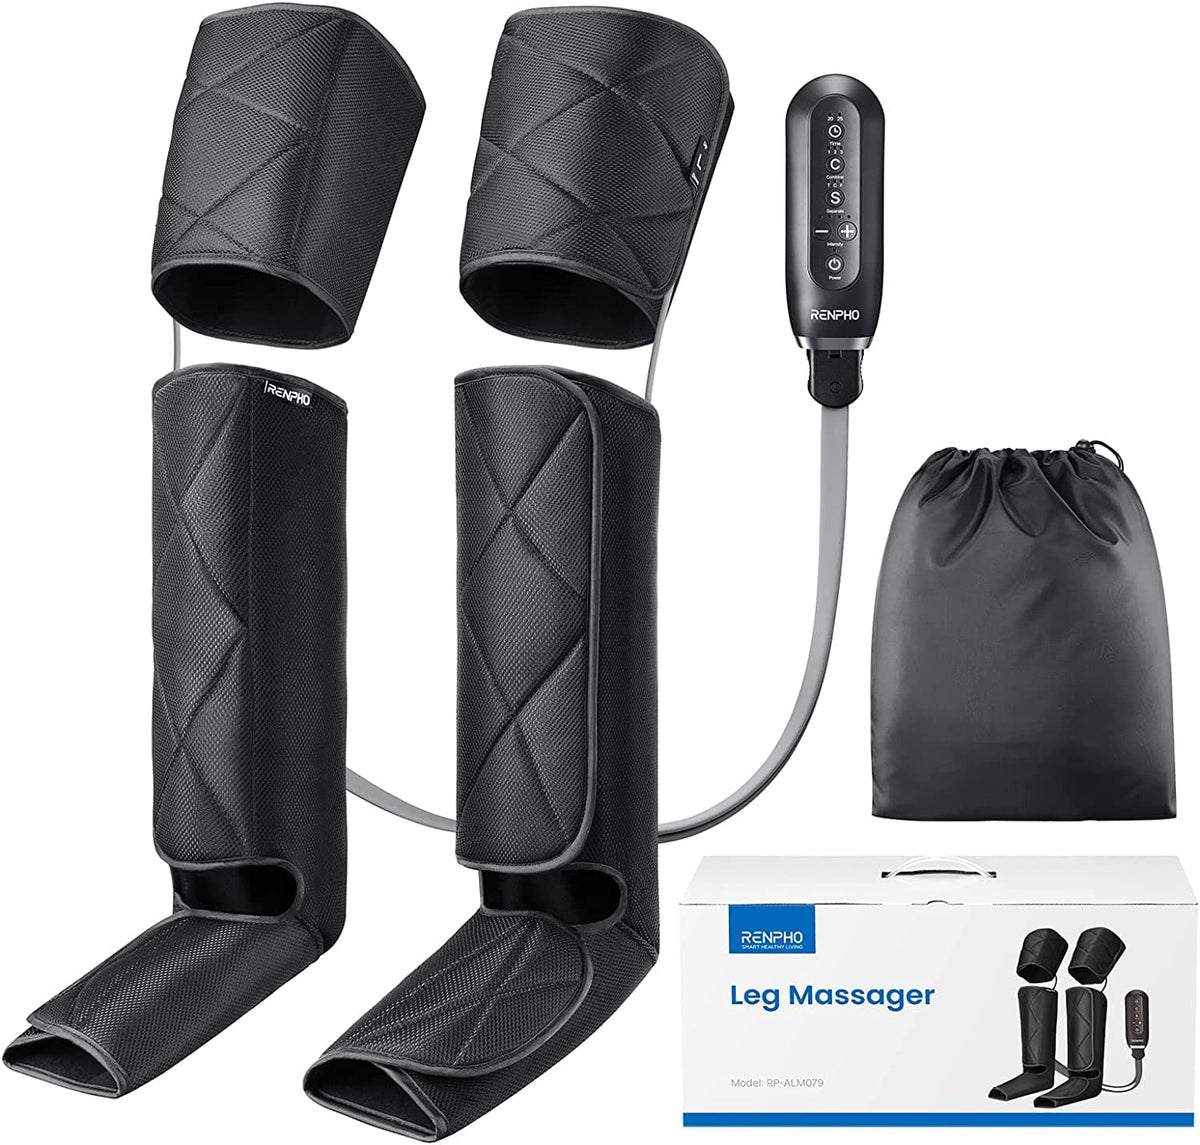 The image shows a Renpho EU Aeria Ultimate 2 Full Leg Massager set, including four black wrap-around leg cuffs, a black handheld control unit with buttons, a gray drawstring storage bag, and a white and blue packaging box. The leg cuffs are designed to be worn on the calves and feet for therapeutic massage.